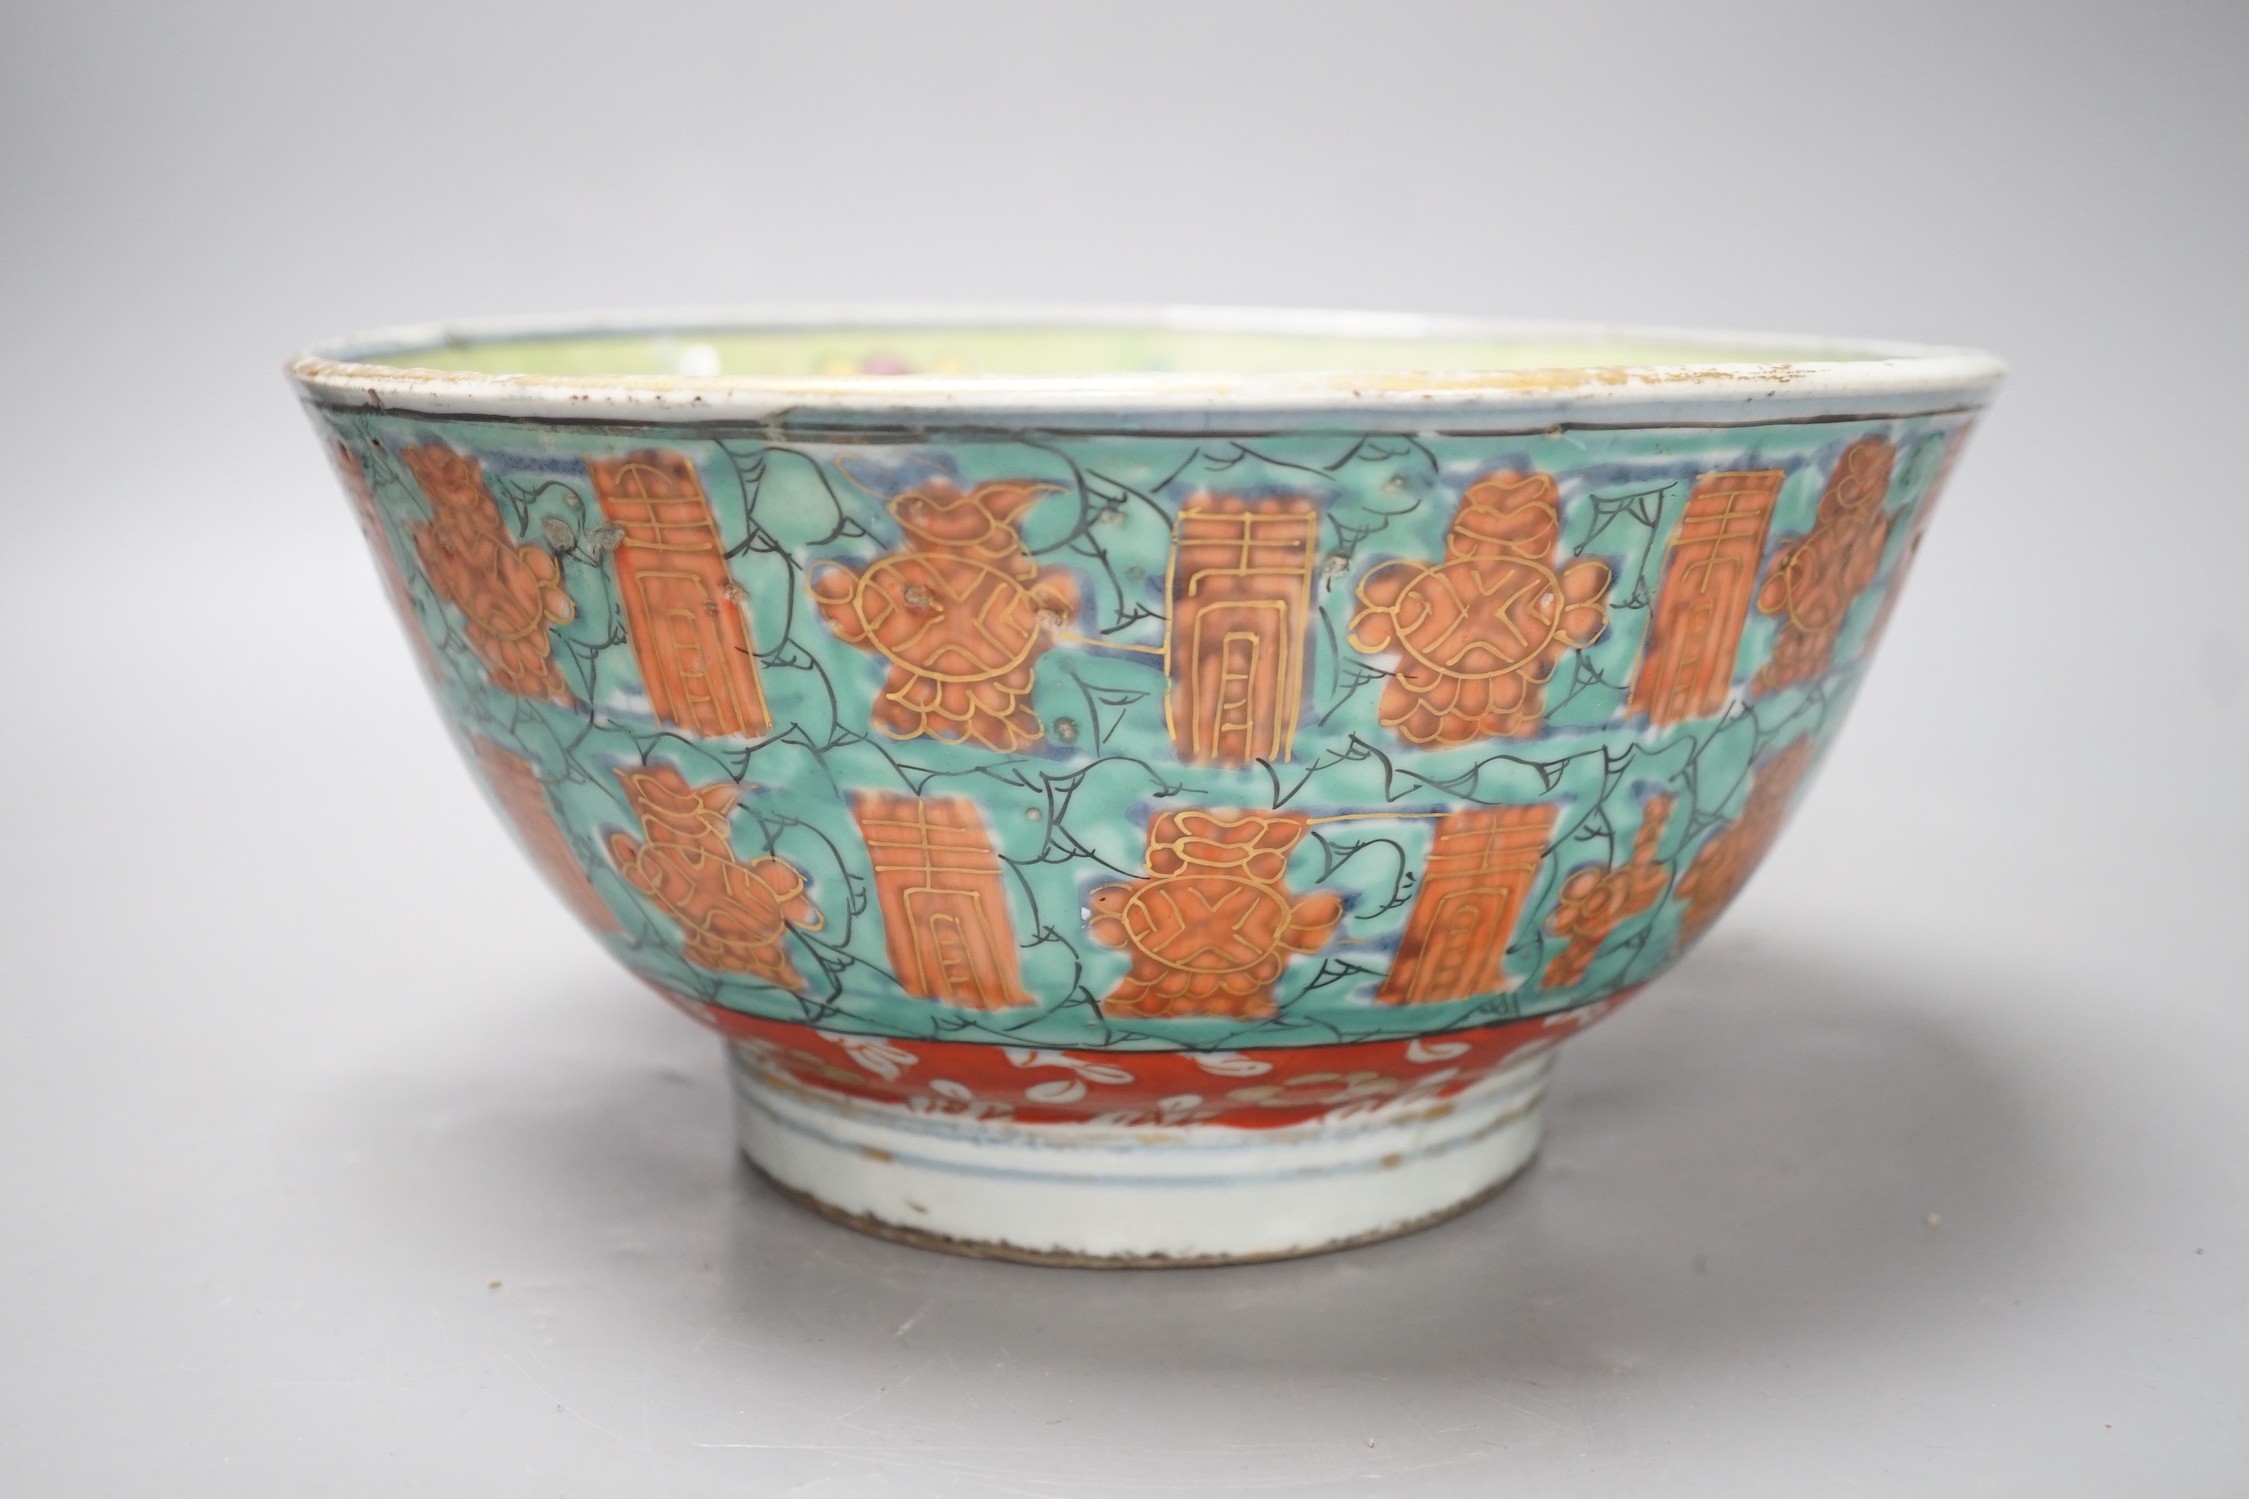 An 18th century clobbered Chinese or Japanese porcelain bowl, 24.5cm diameter